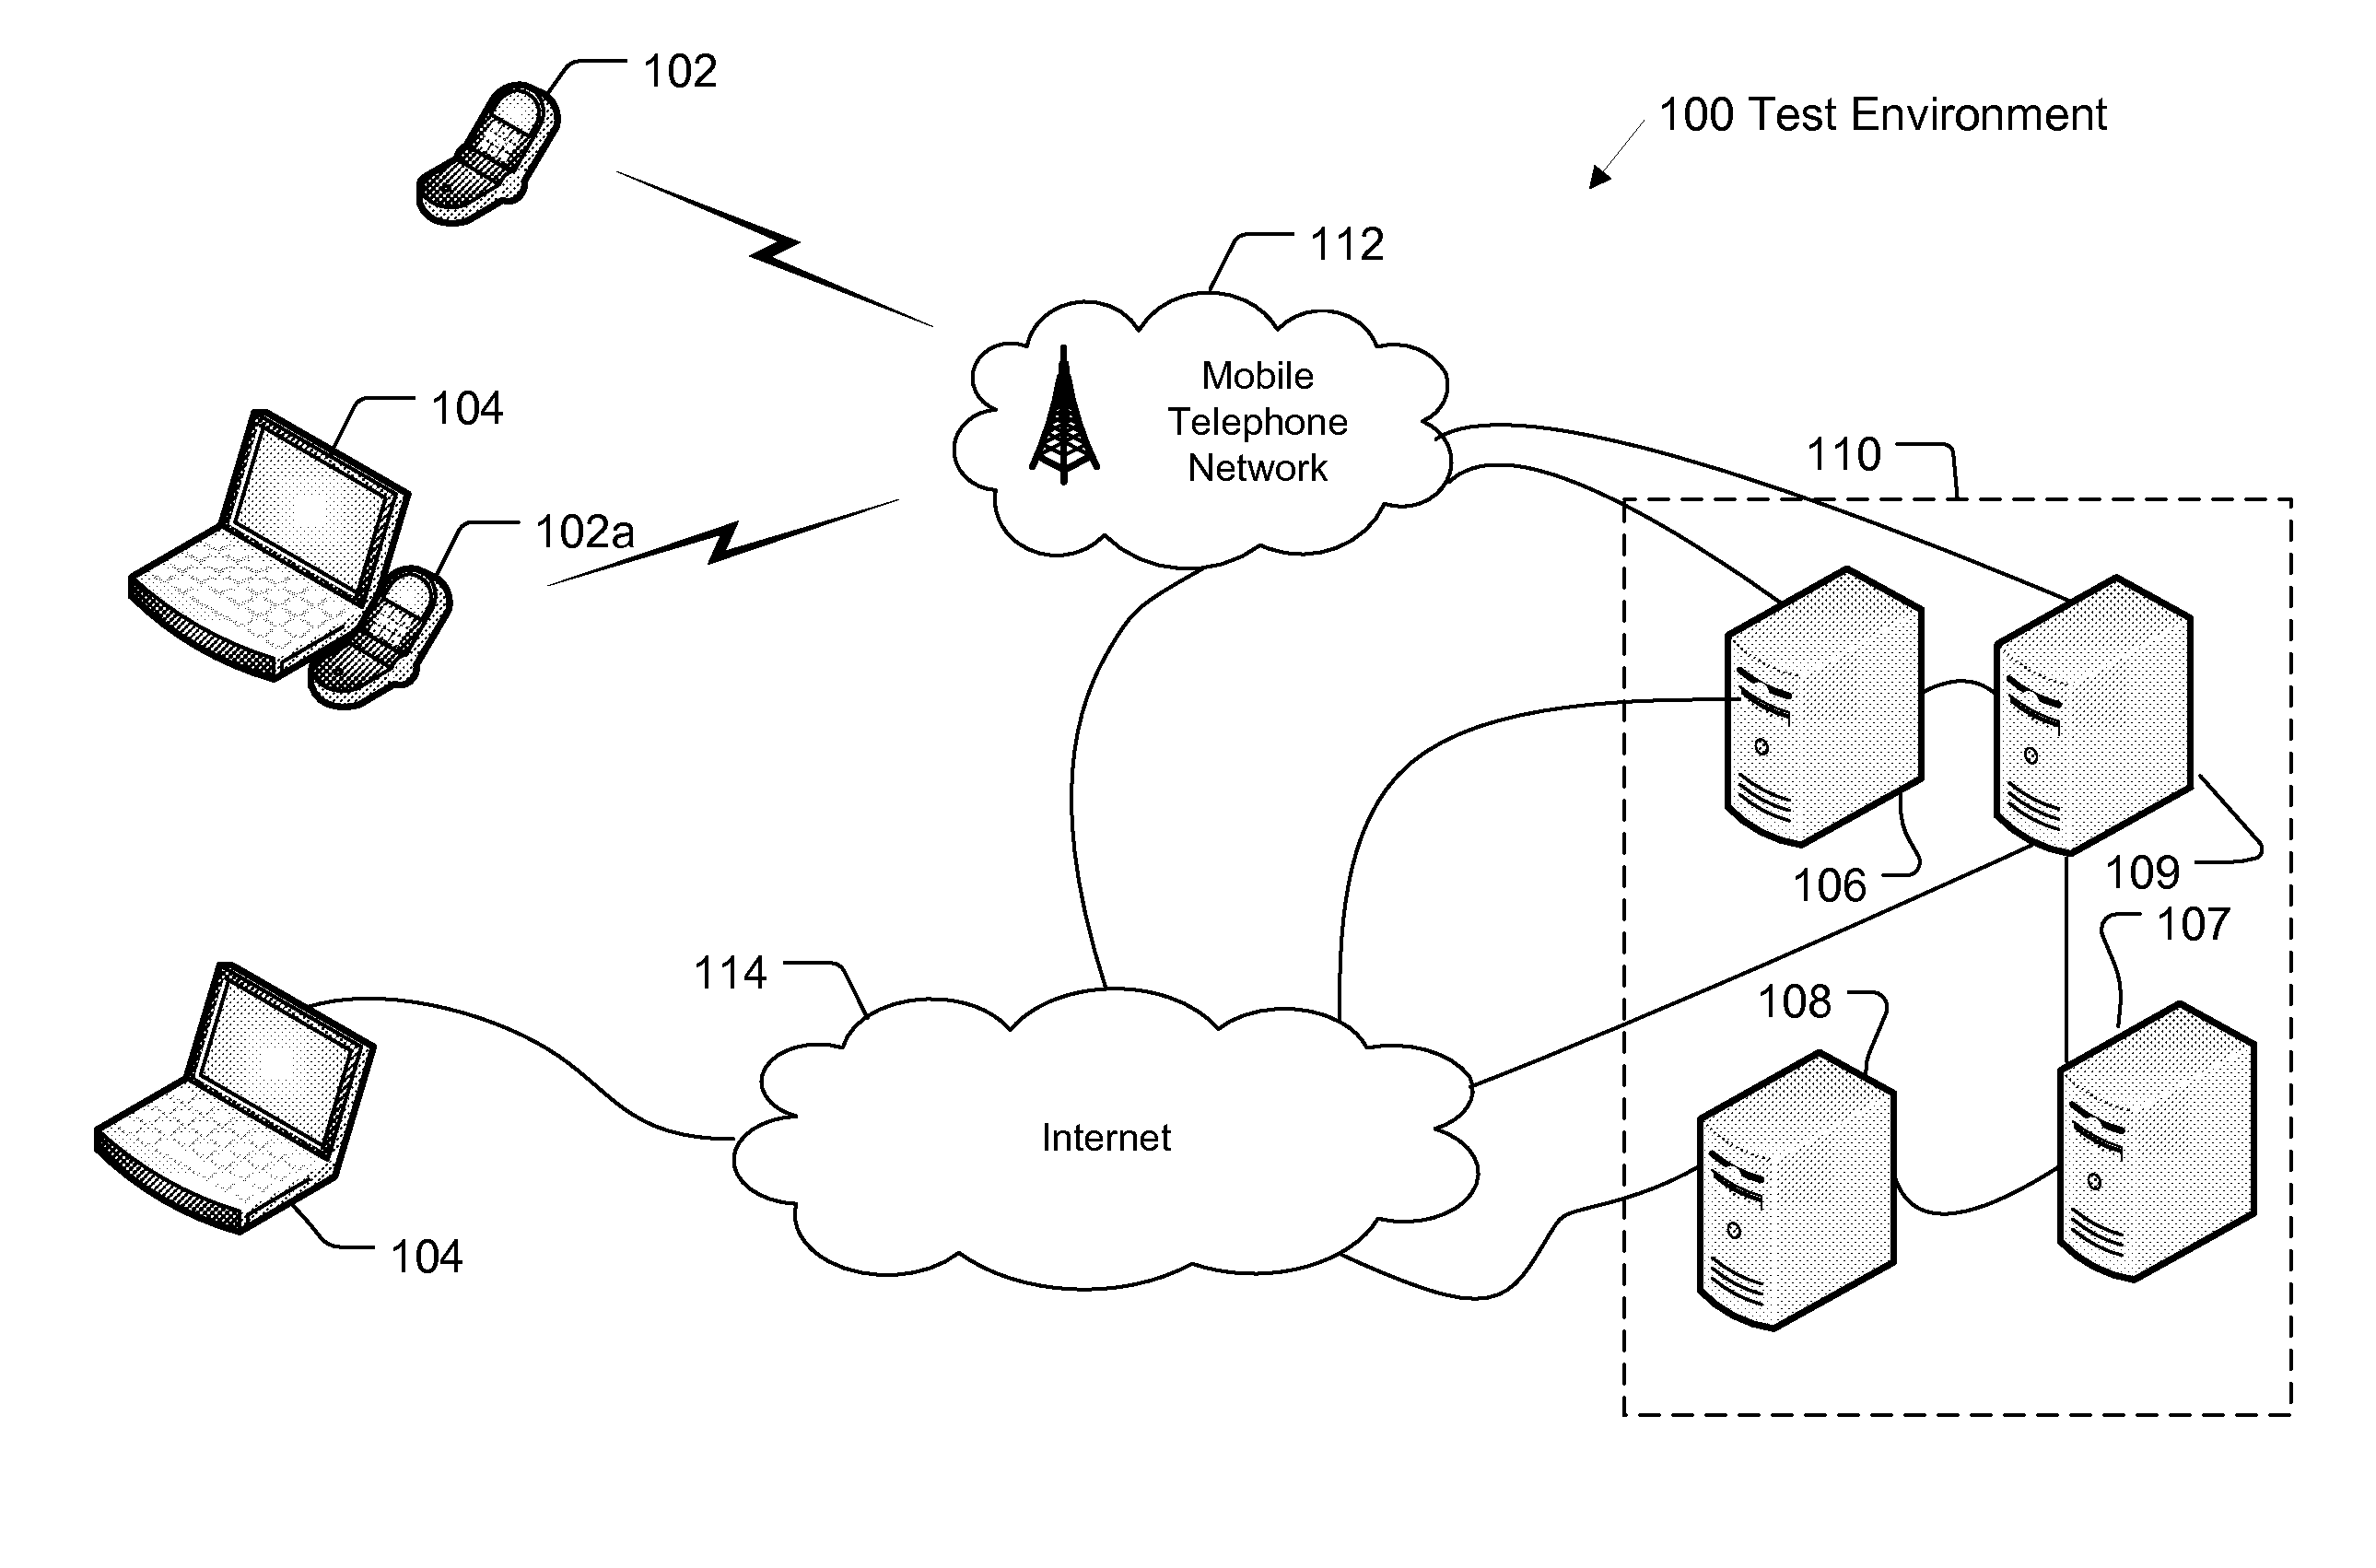 System and Method for Testing Mobile Telephone Devices using a Plurality of Communication Protocols